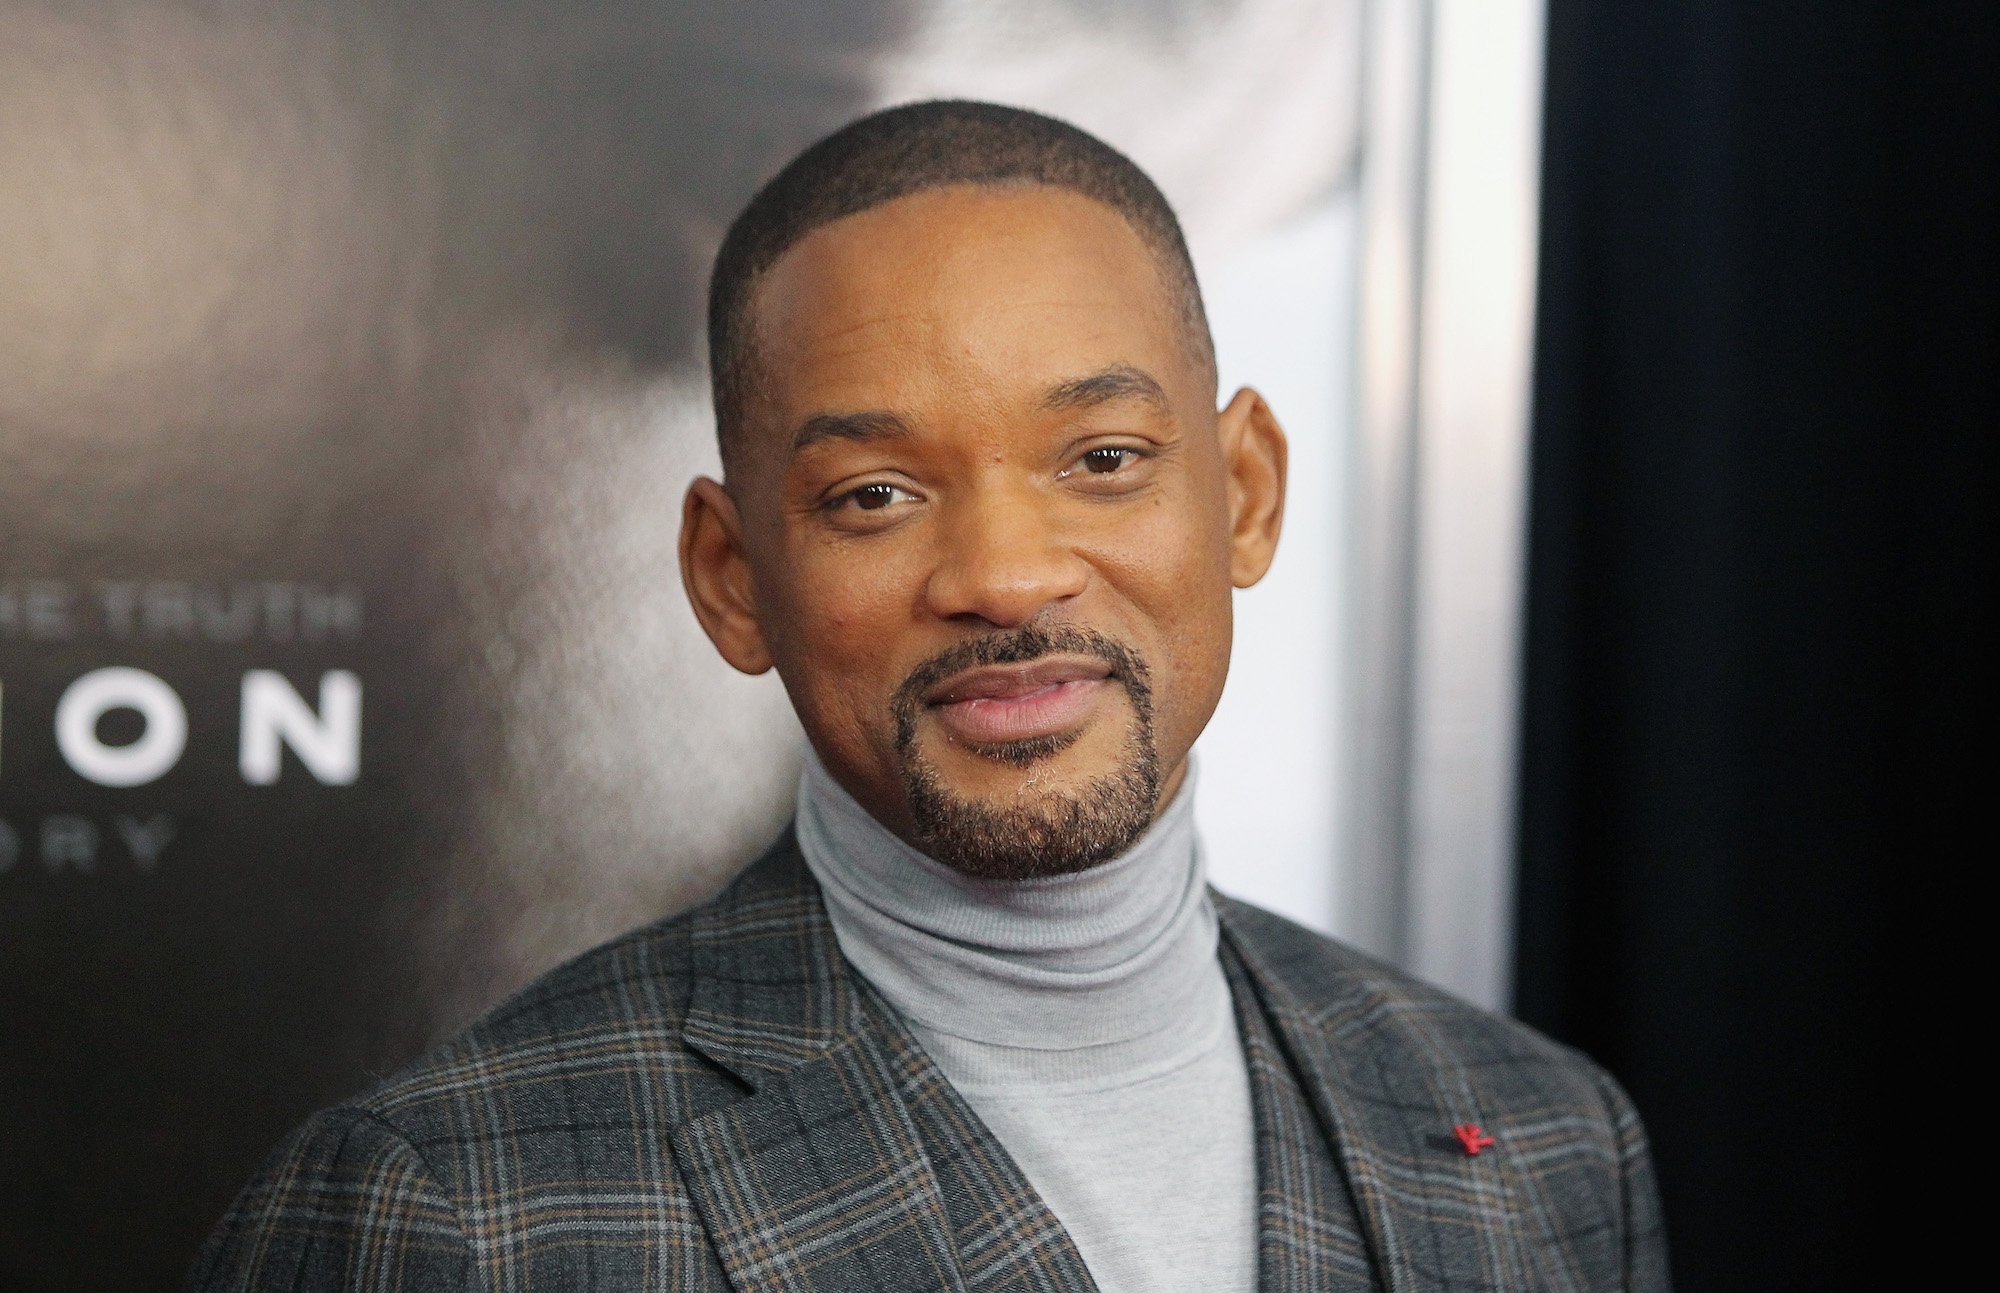 Will Smith smiling at the camera in front of a black background